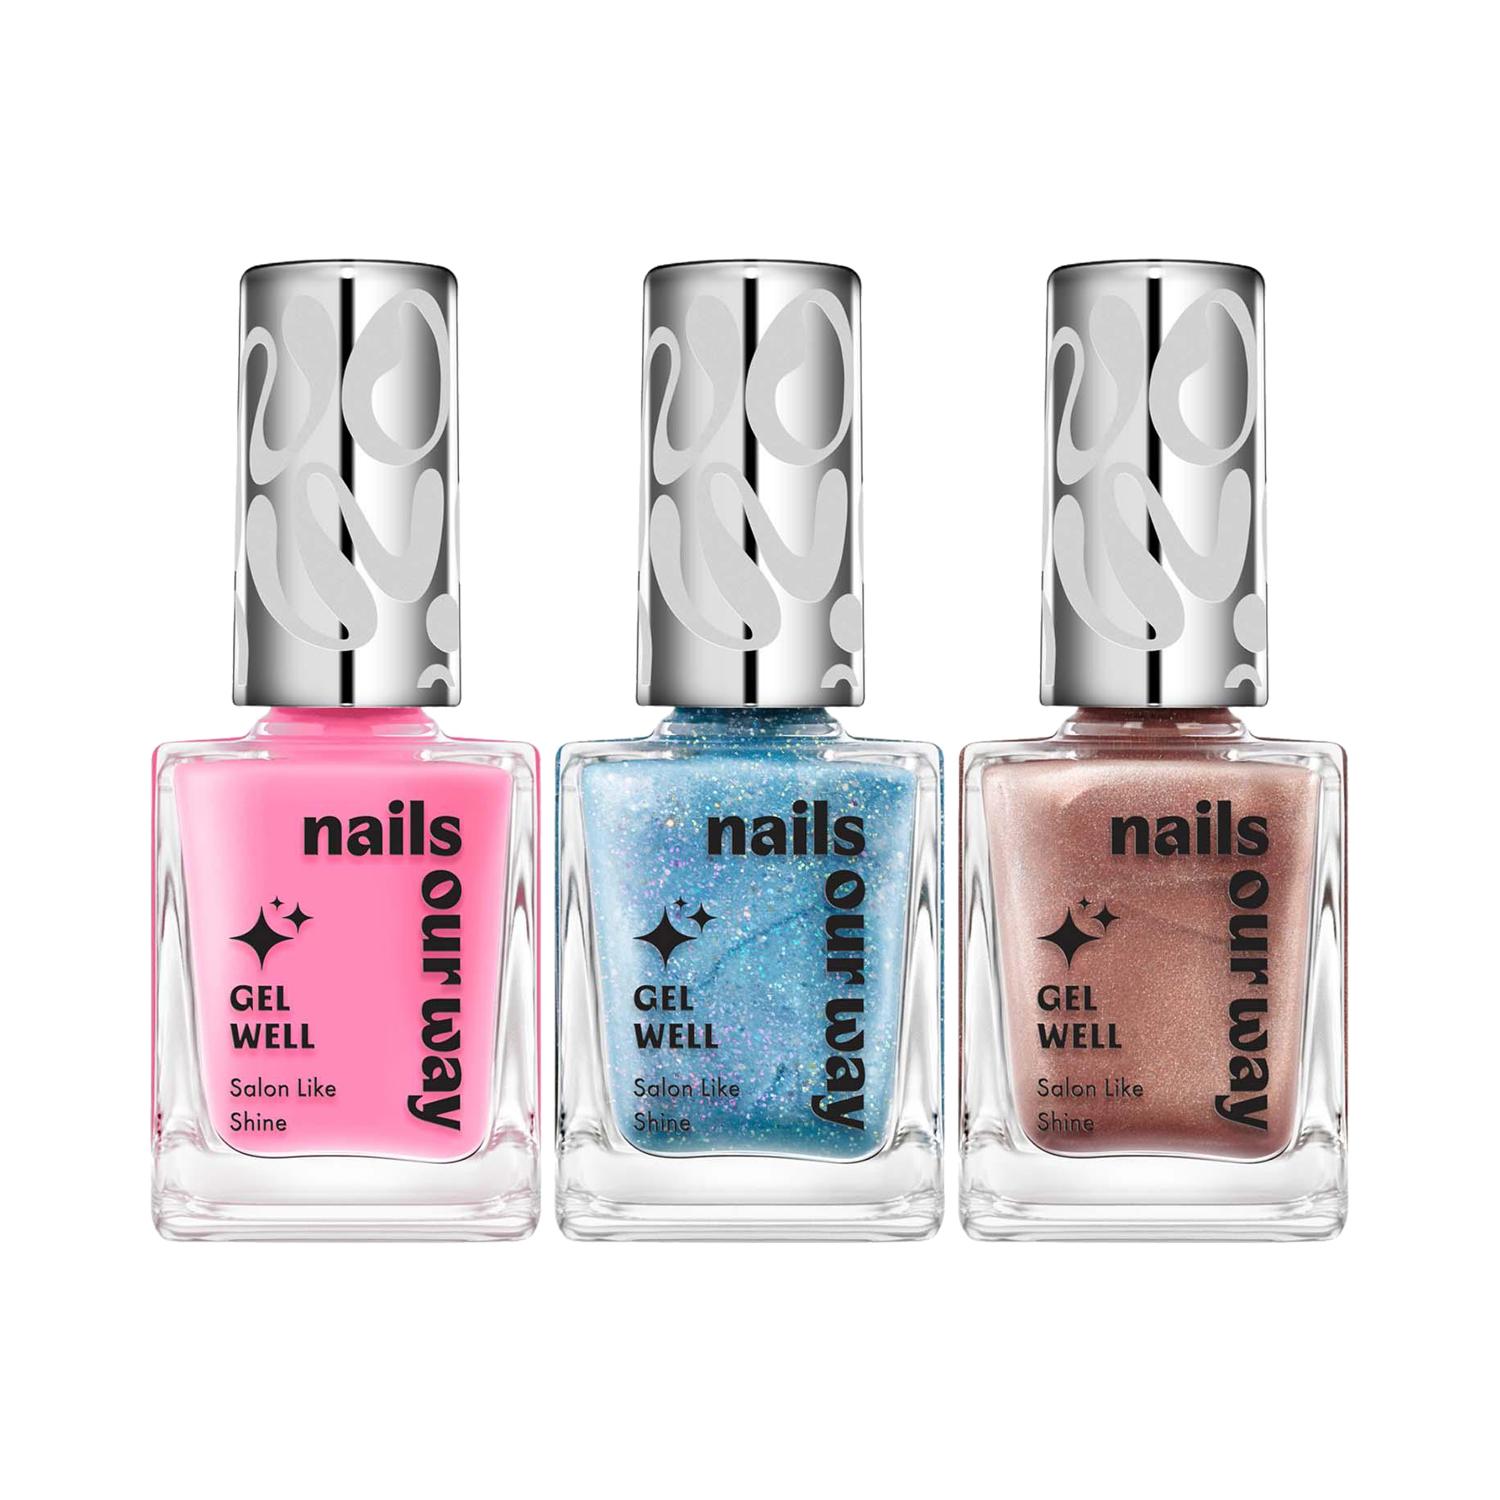 Nails Our Way | Nails Our Way Gel Well Nail Enamel Office Crush Combo - Pk3